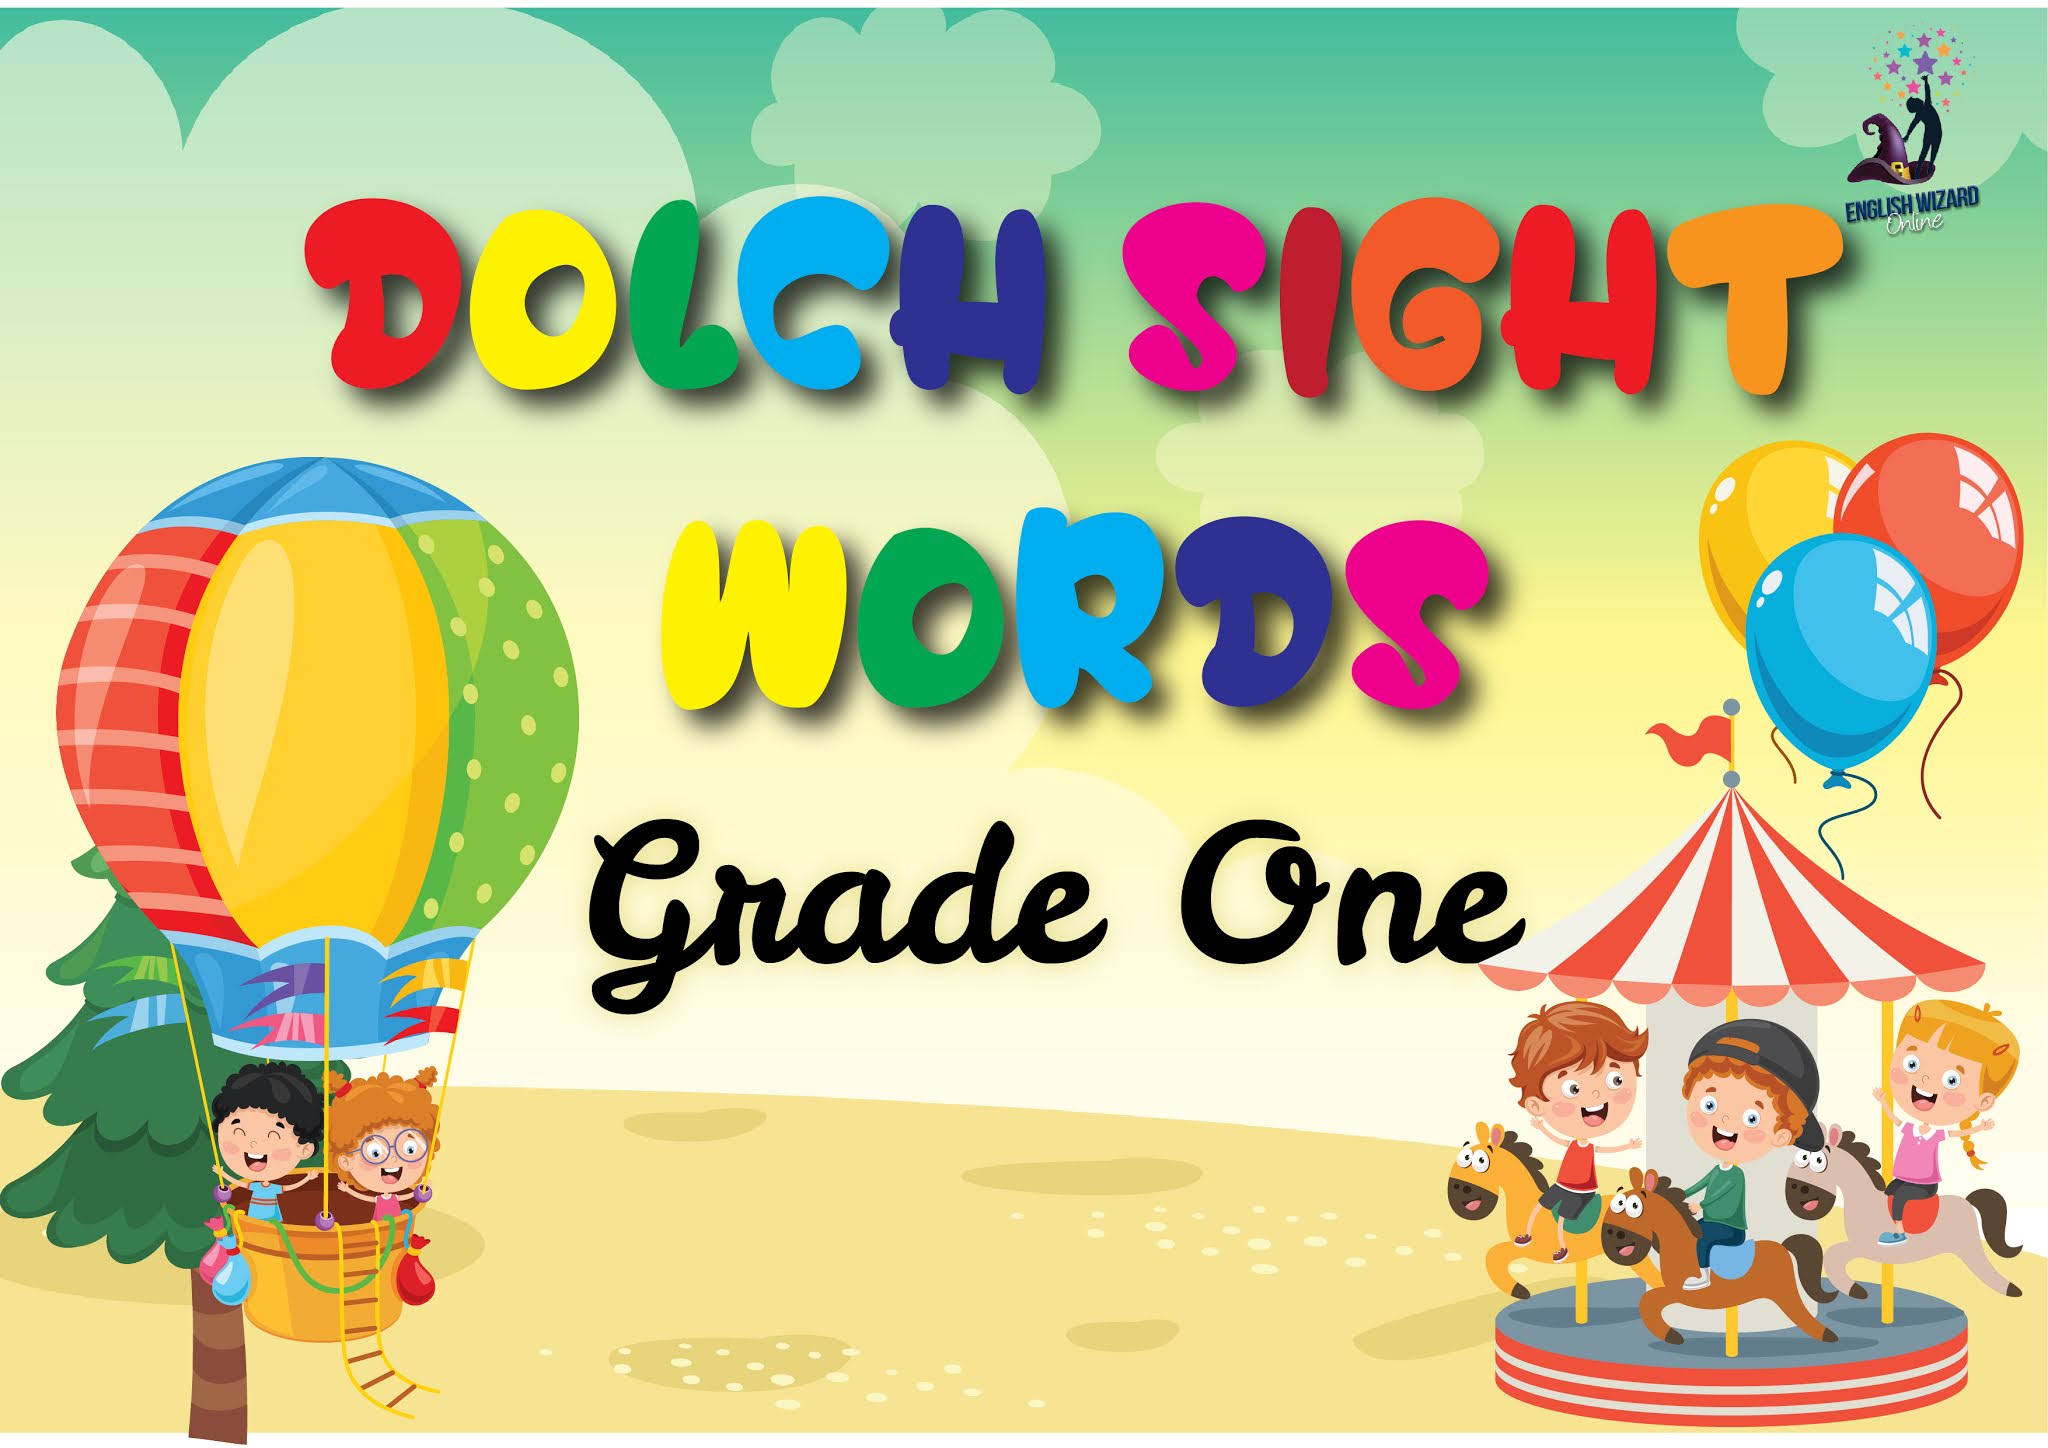 english-wizard-online-dolch-basic-sight-words-grade-1-basic-sight-words